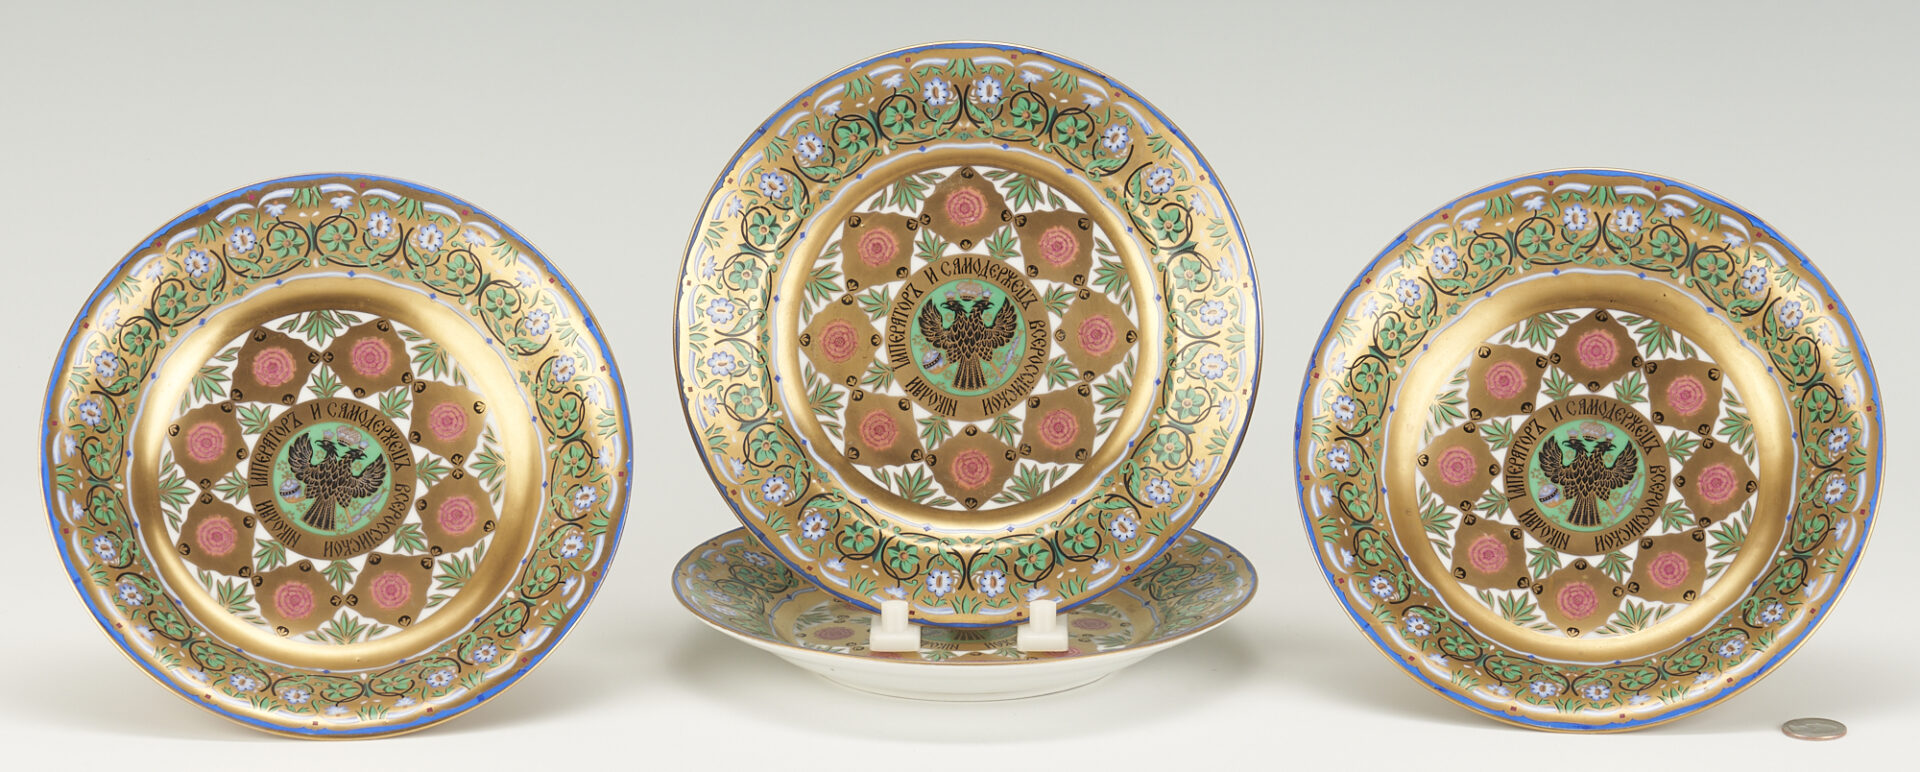 Lot 270: Russian Imperial Porcelain, 2 Tazzas & 2 Plates